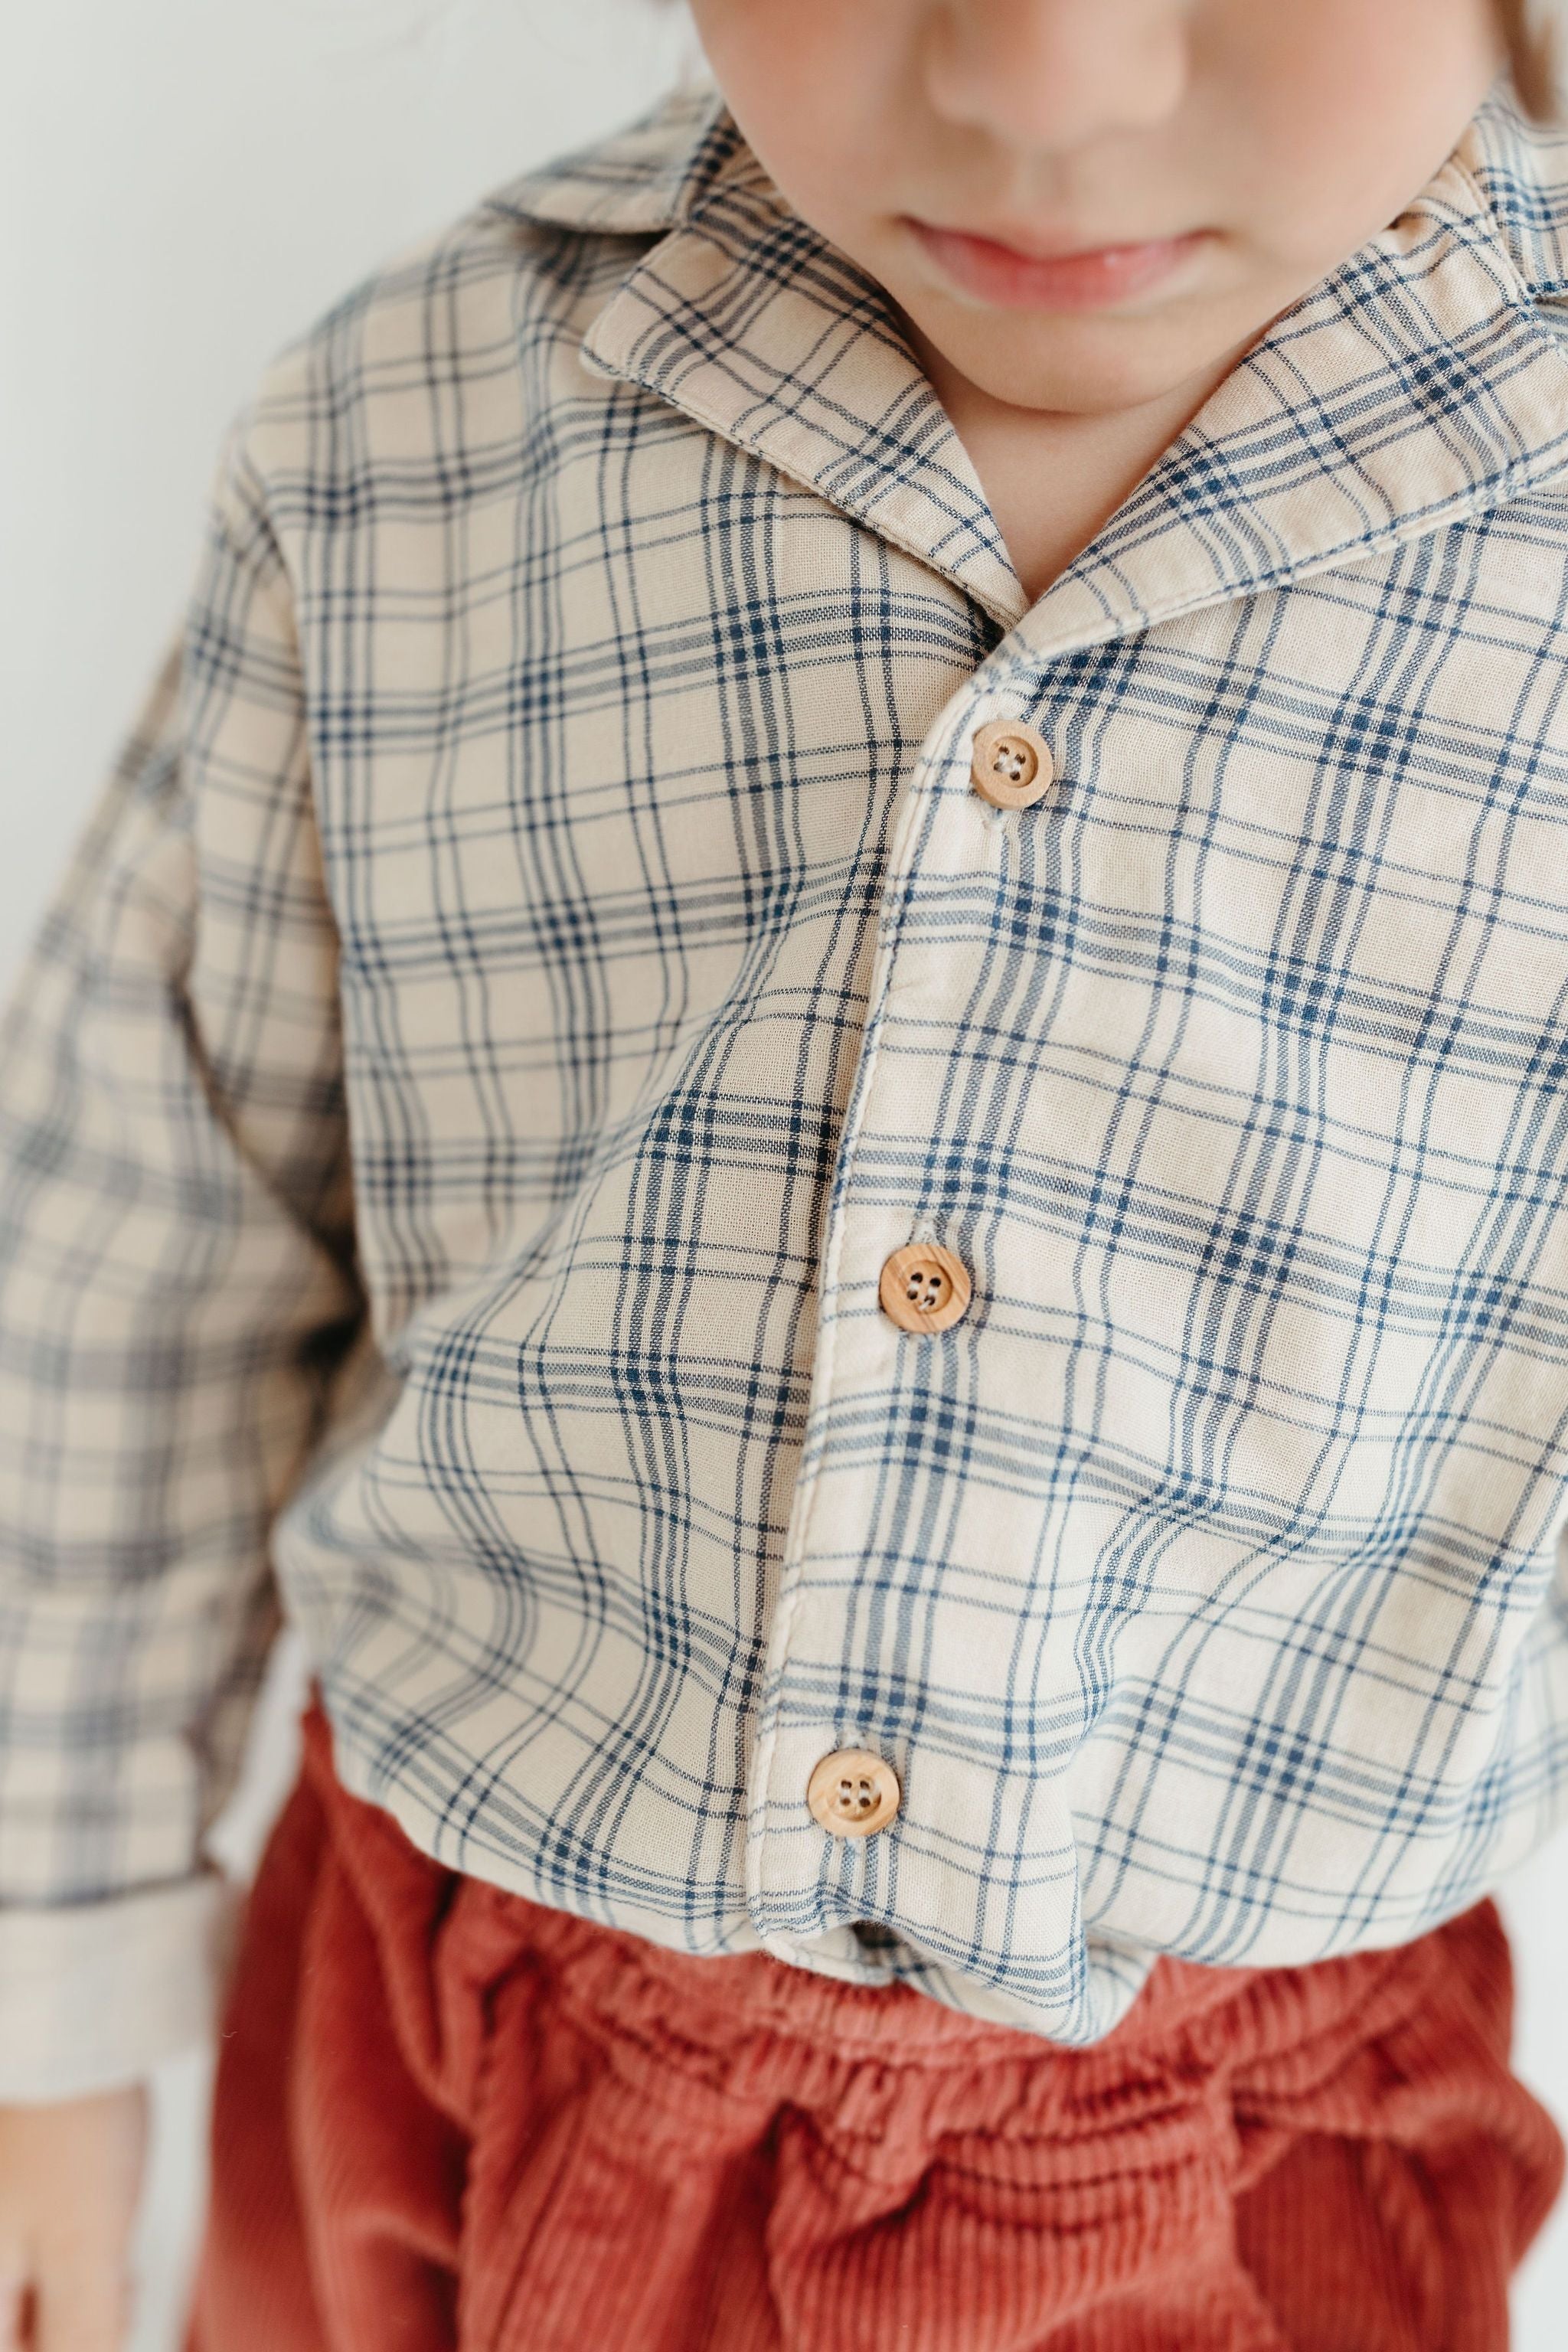 Fin and Vince Button Up in Navy Plaid | 30% OFF SALE | Children of the Wild